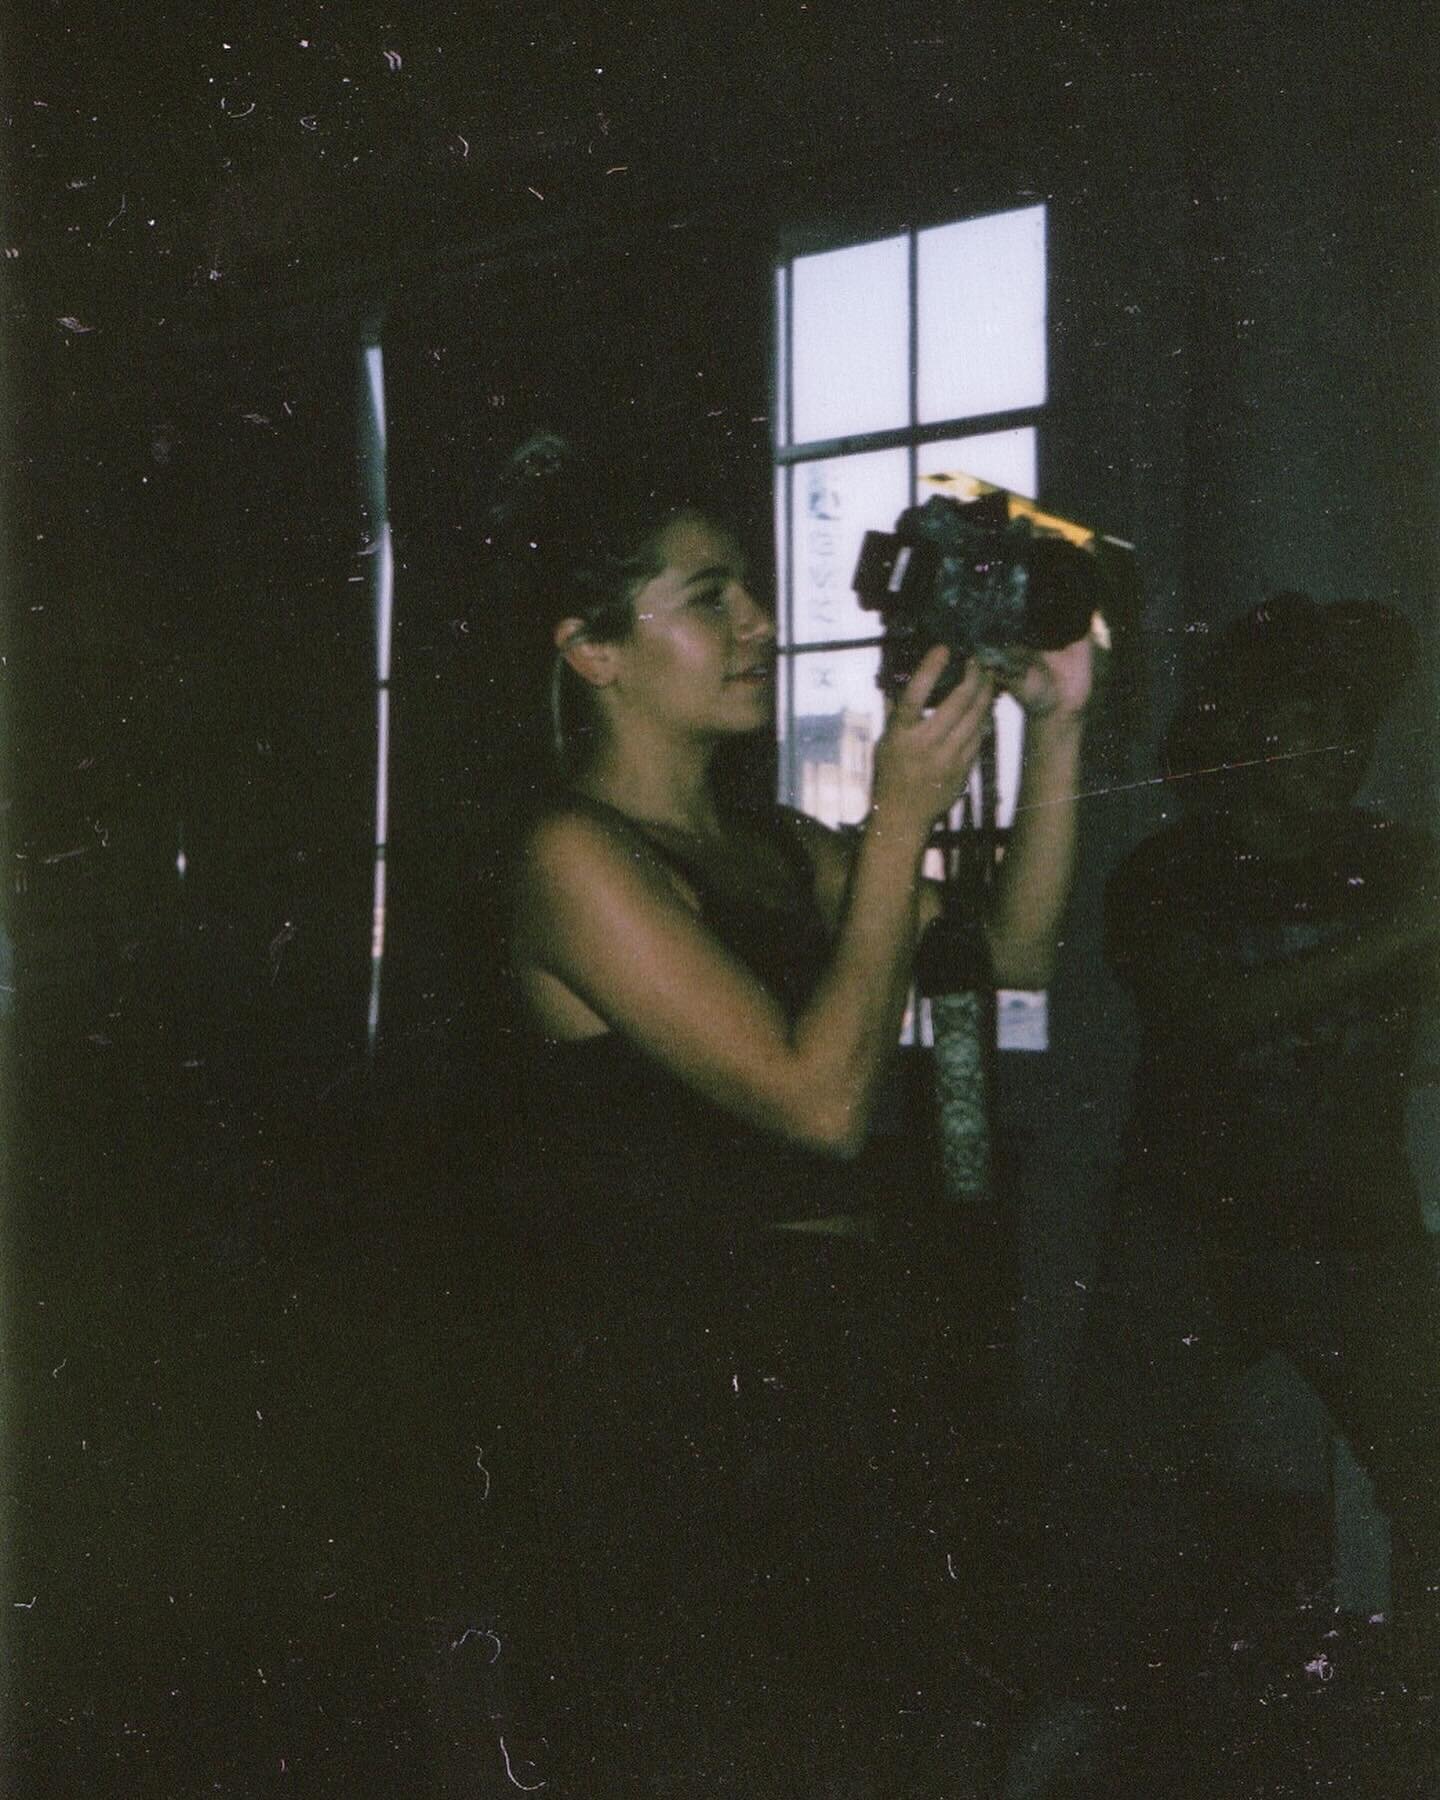 With a new year comes new ventures, new changes, and new opportunities. Our talented, fearless, endlessly passionate photographer goddess, @samsanroman, has been with us since January 2020. We have been blessed to be in the center of her camera lens 